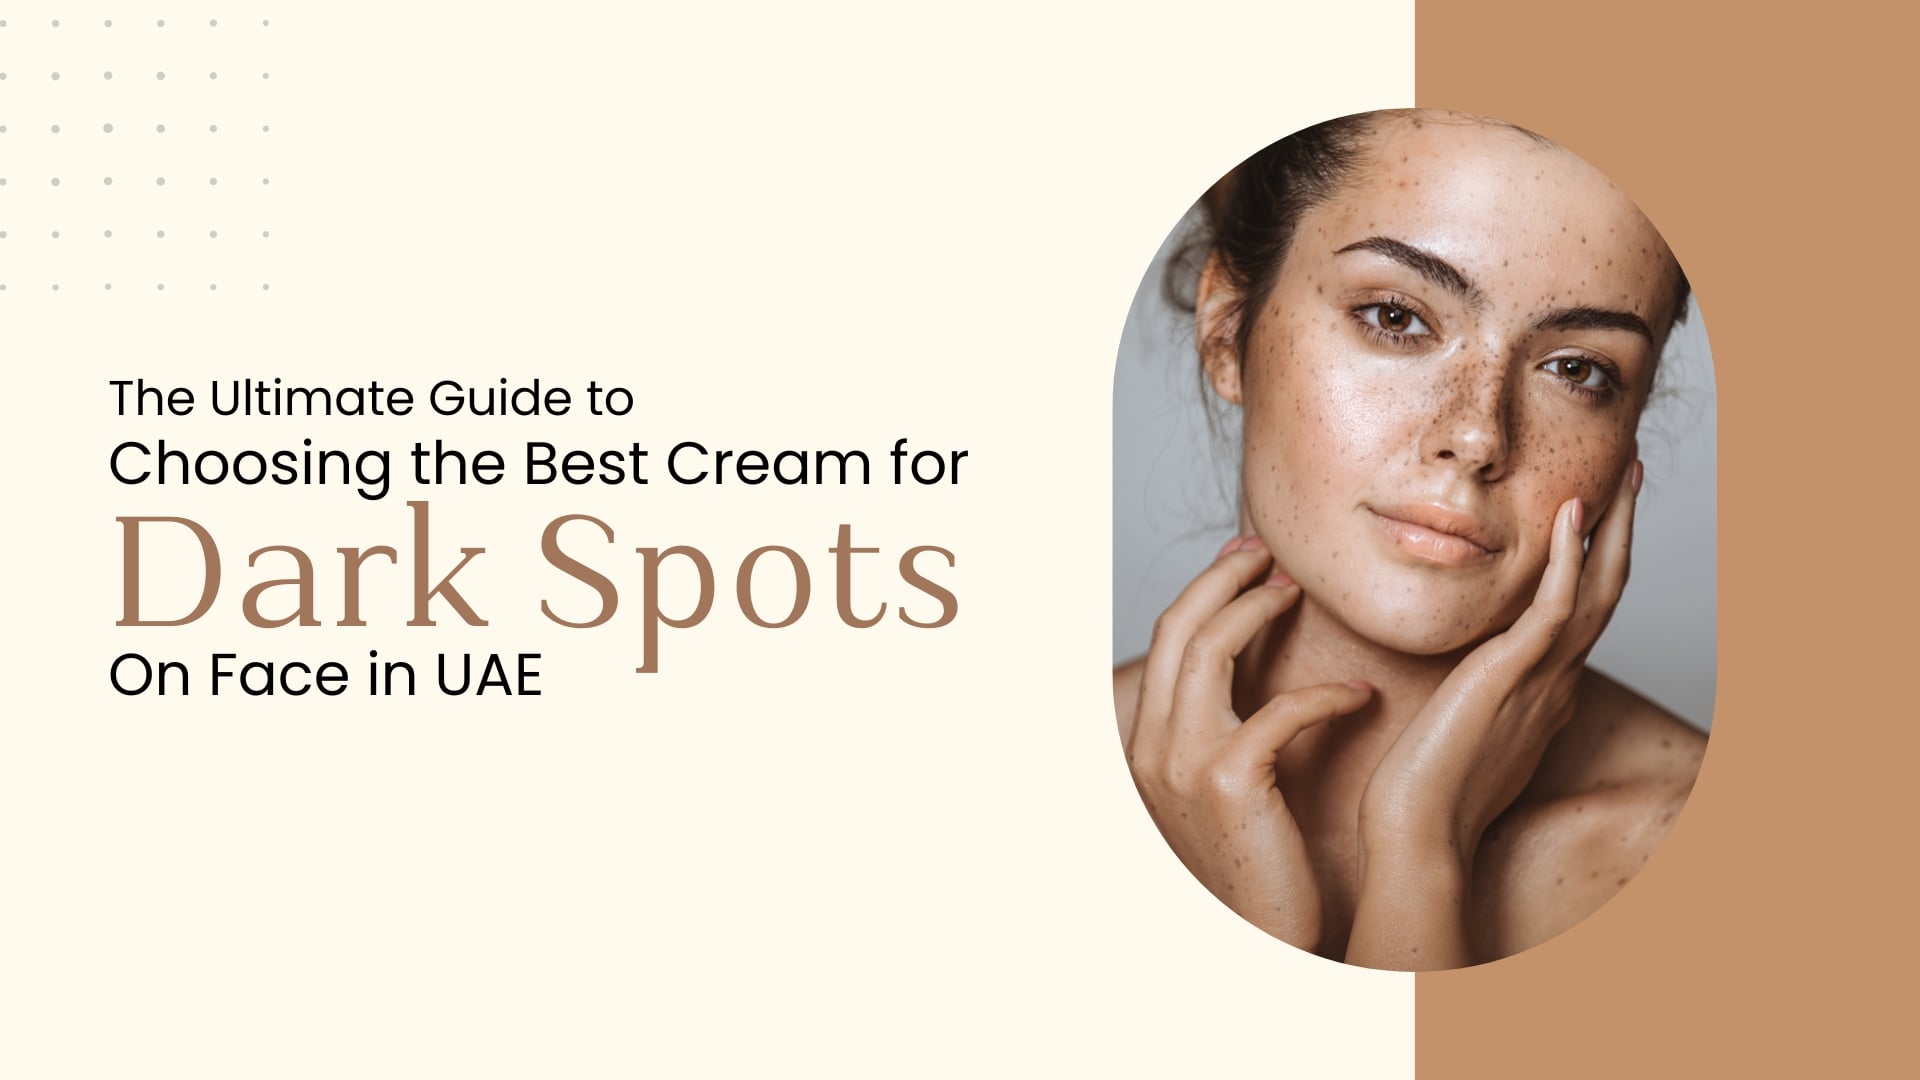 The Ultimate Guide to Choosing the Best Cream for Dark Spots on Face in UAE